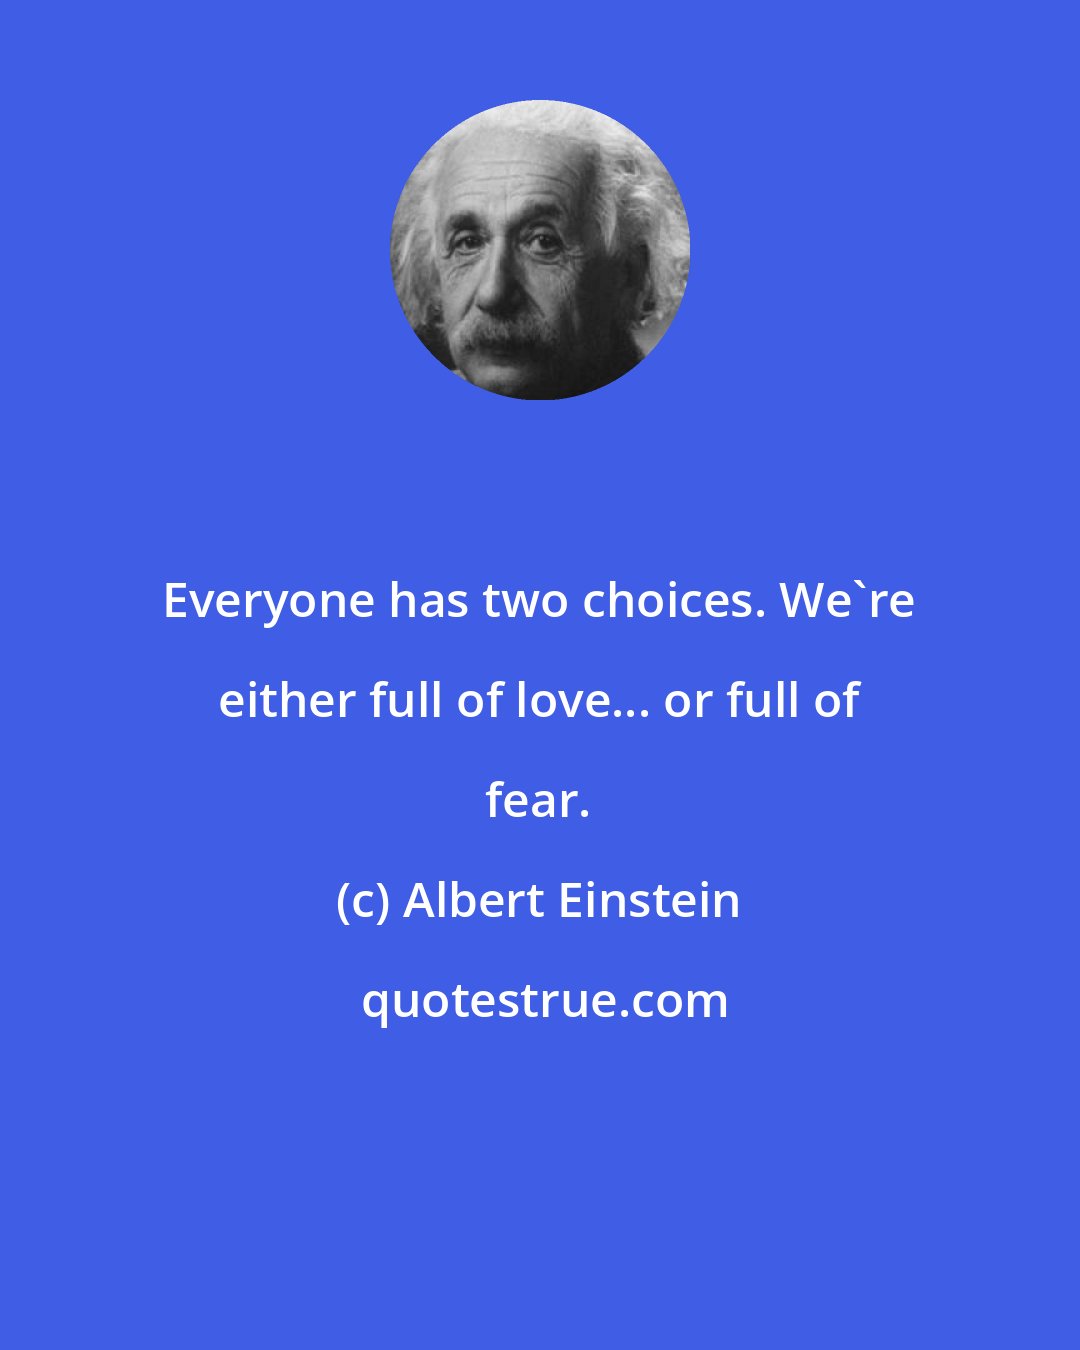 Albert Einstein: Everyone has two choices. We're either full of love... or full of fear.